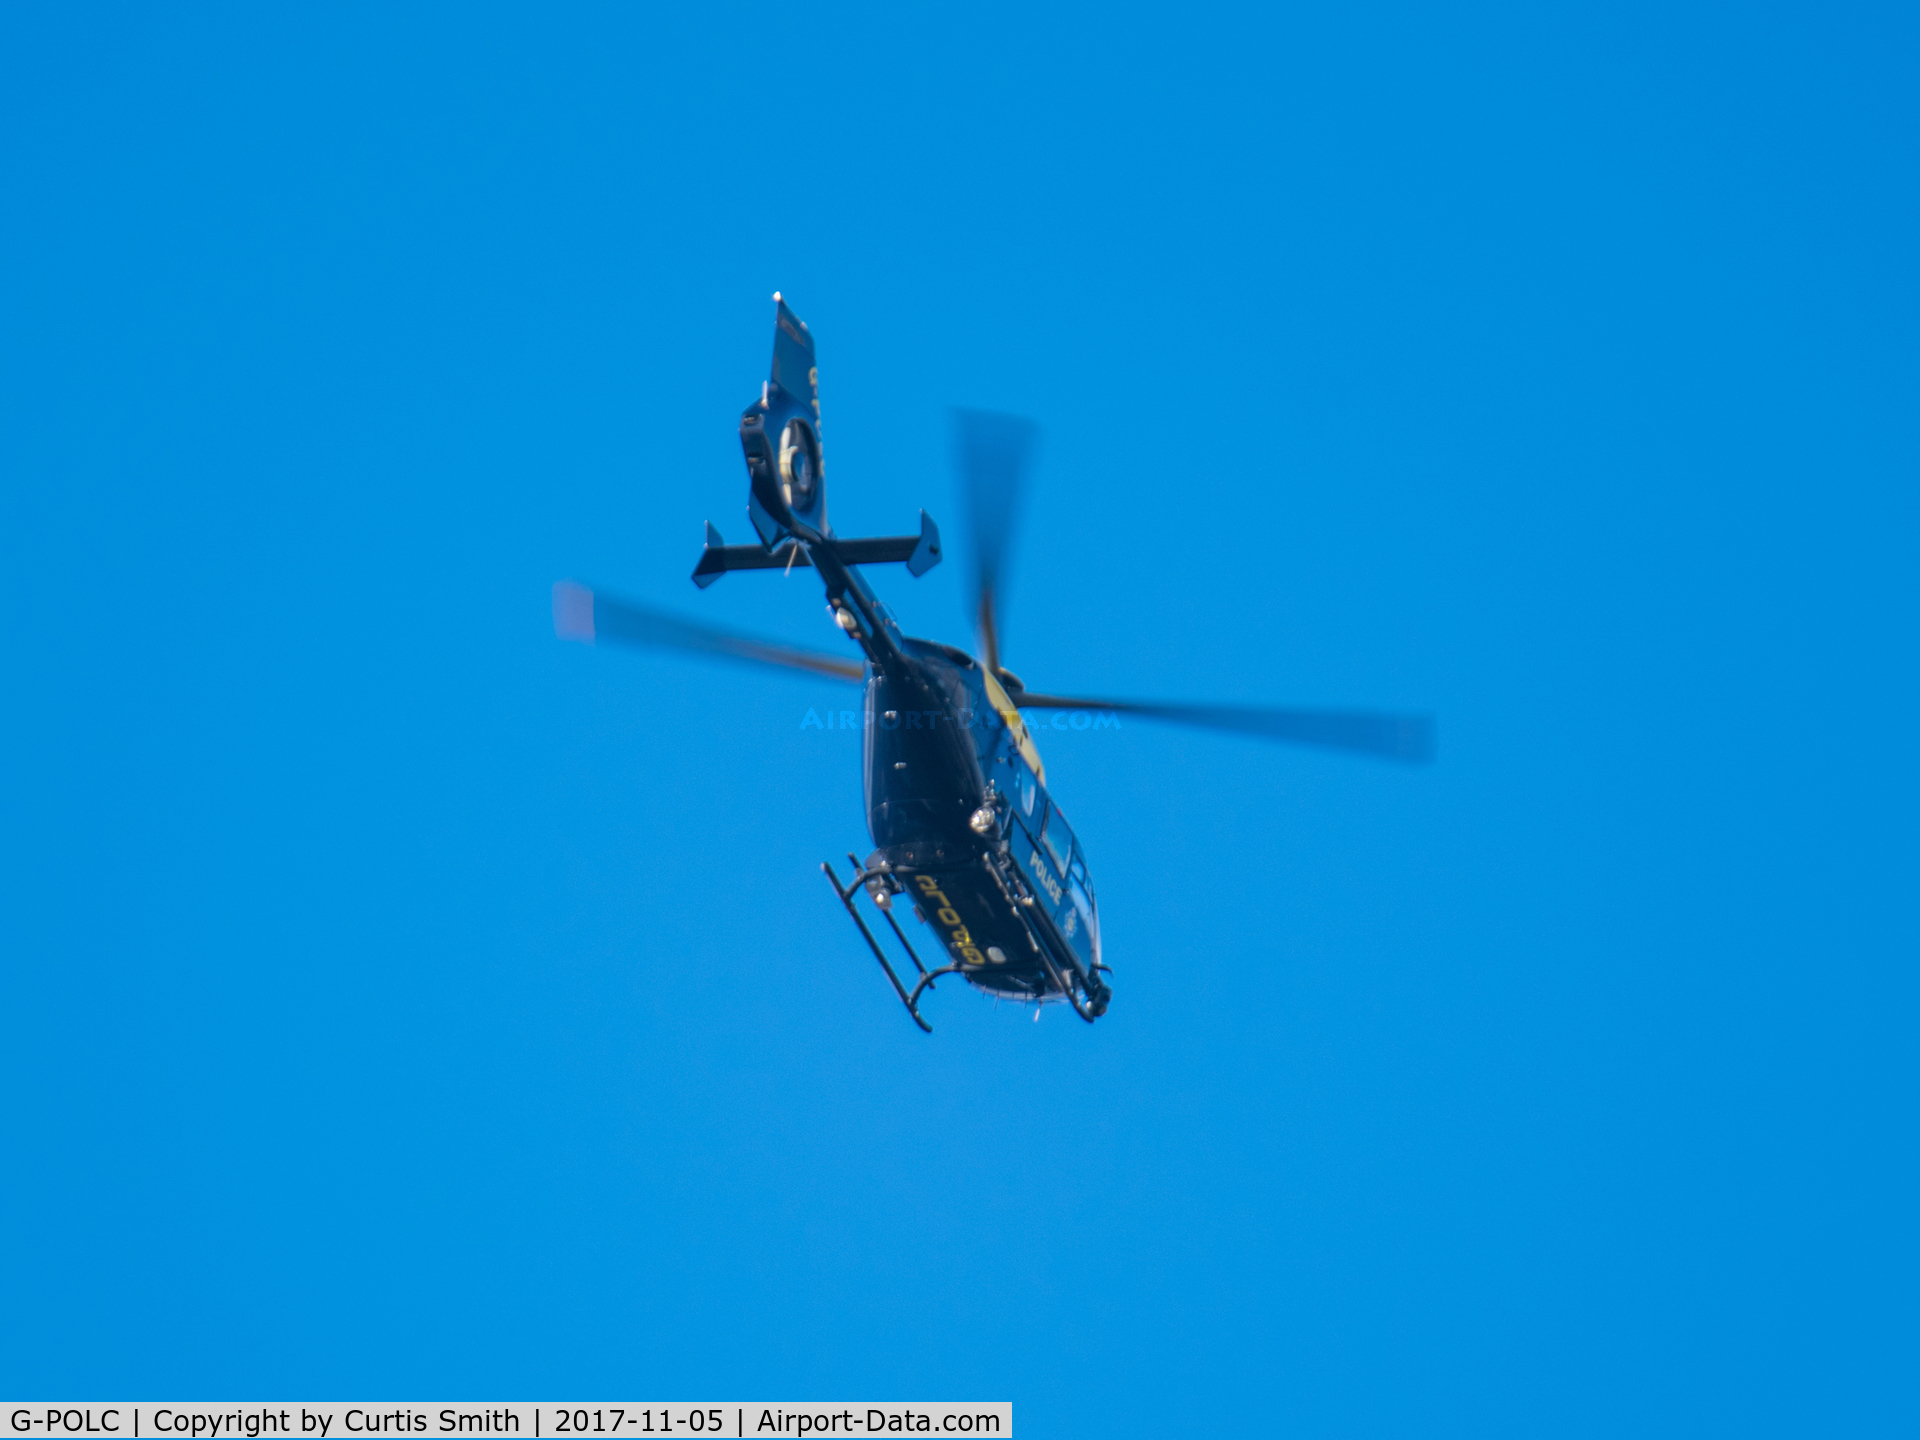 G-POLC, 2001 Eurocopter EC-135T-2+ C/N 0209, G-POLC Hovering over Rotherham, UK.